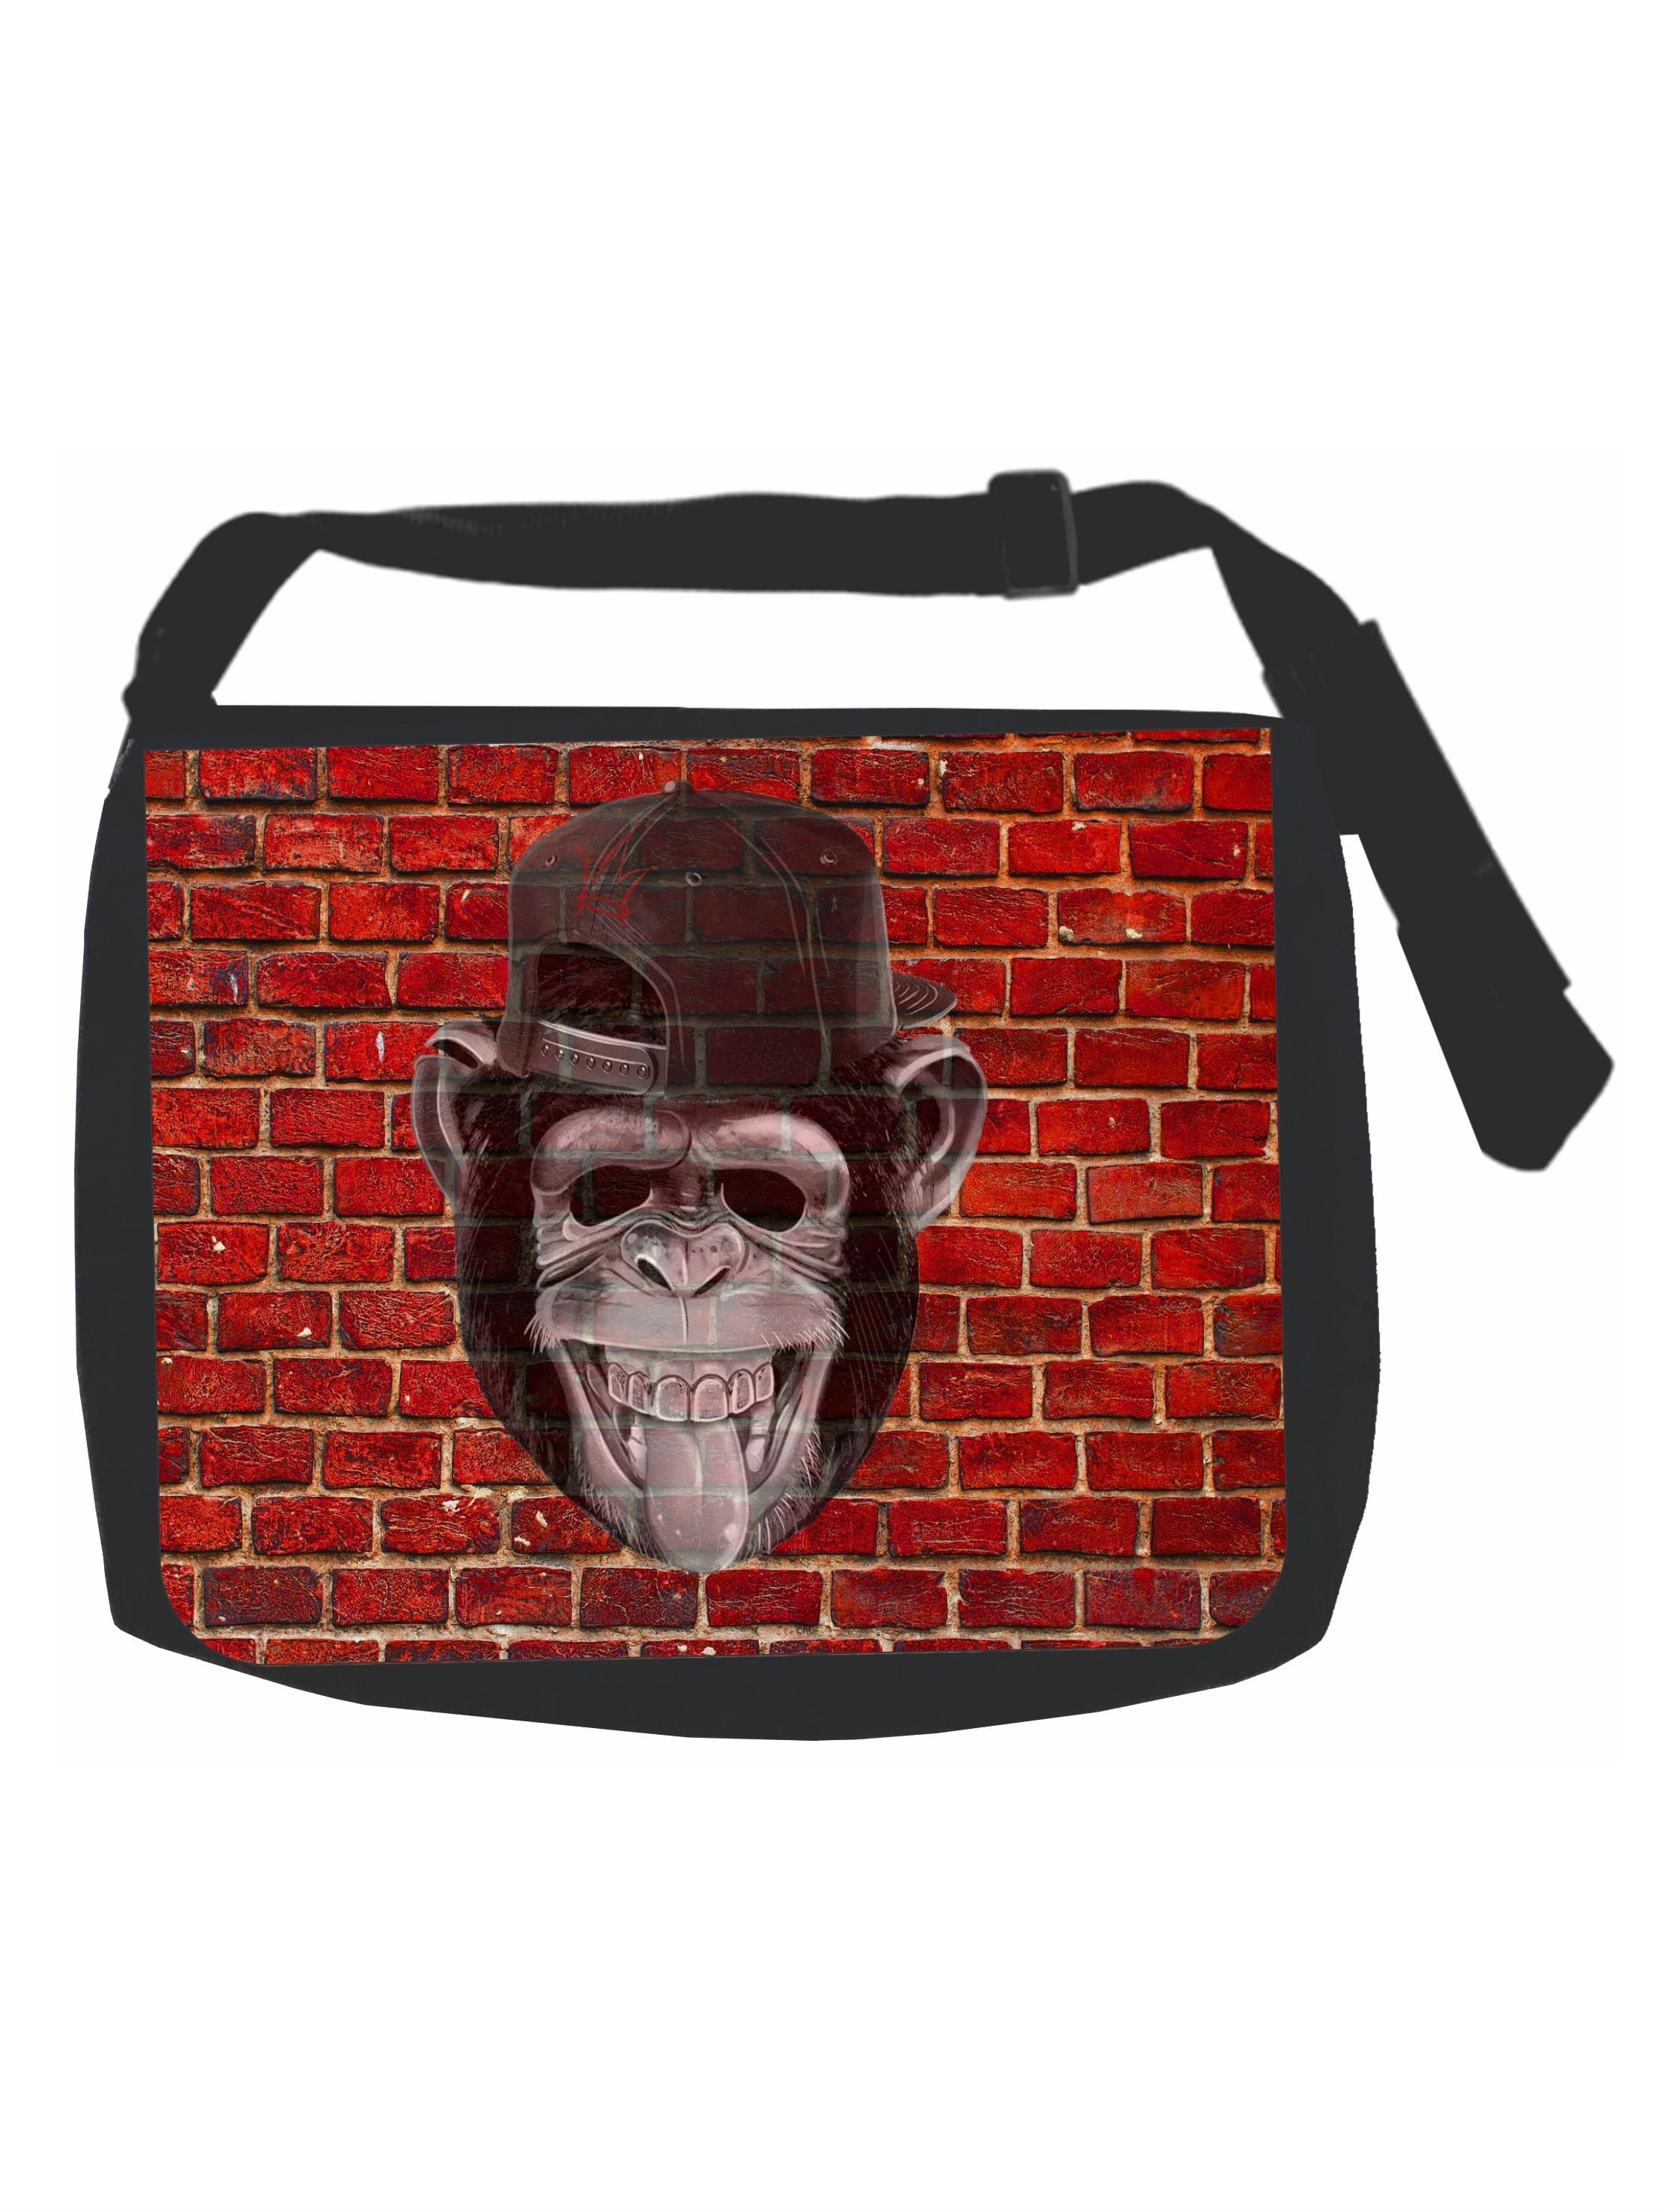 Monkey Punk Brick Wall Print - Black Laptop Shoulder Messenger Bag and Small Wire Accessories Case Set - image 1 of 1